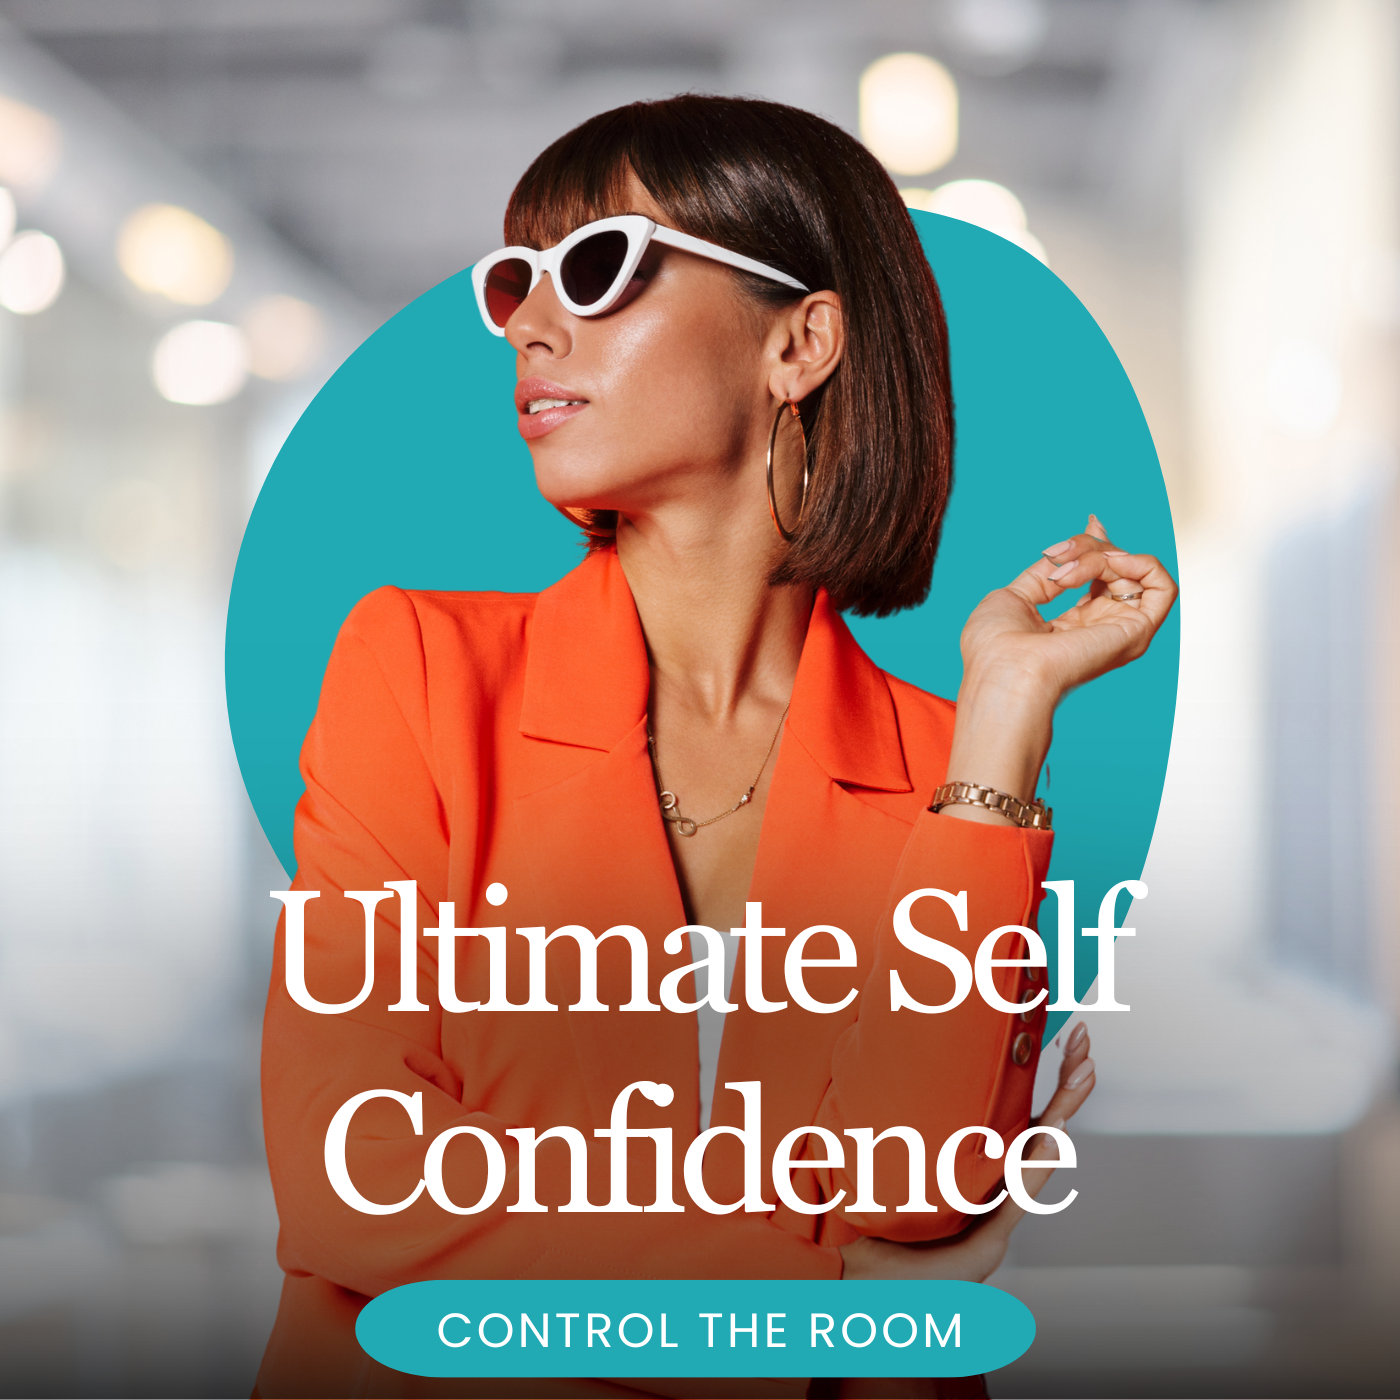 Ultimate Self Confidence - Control the Room